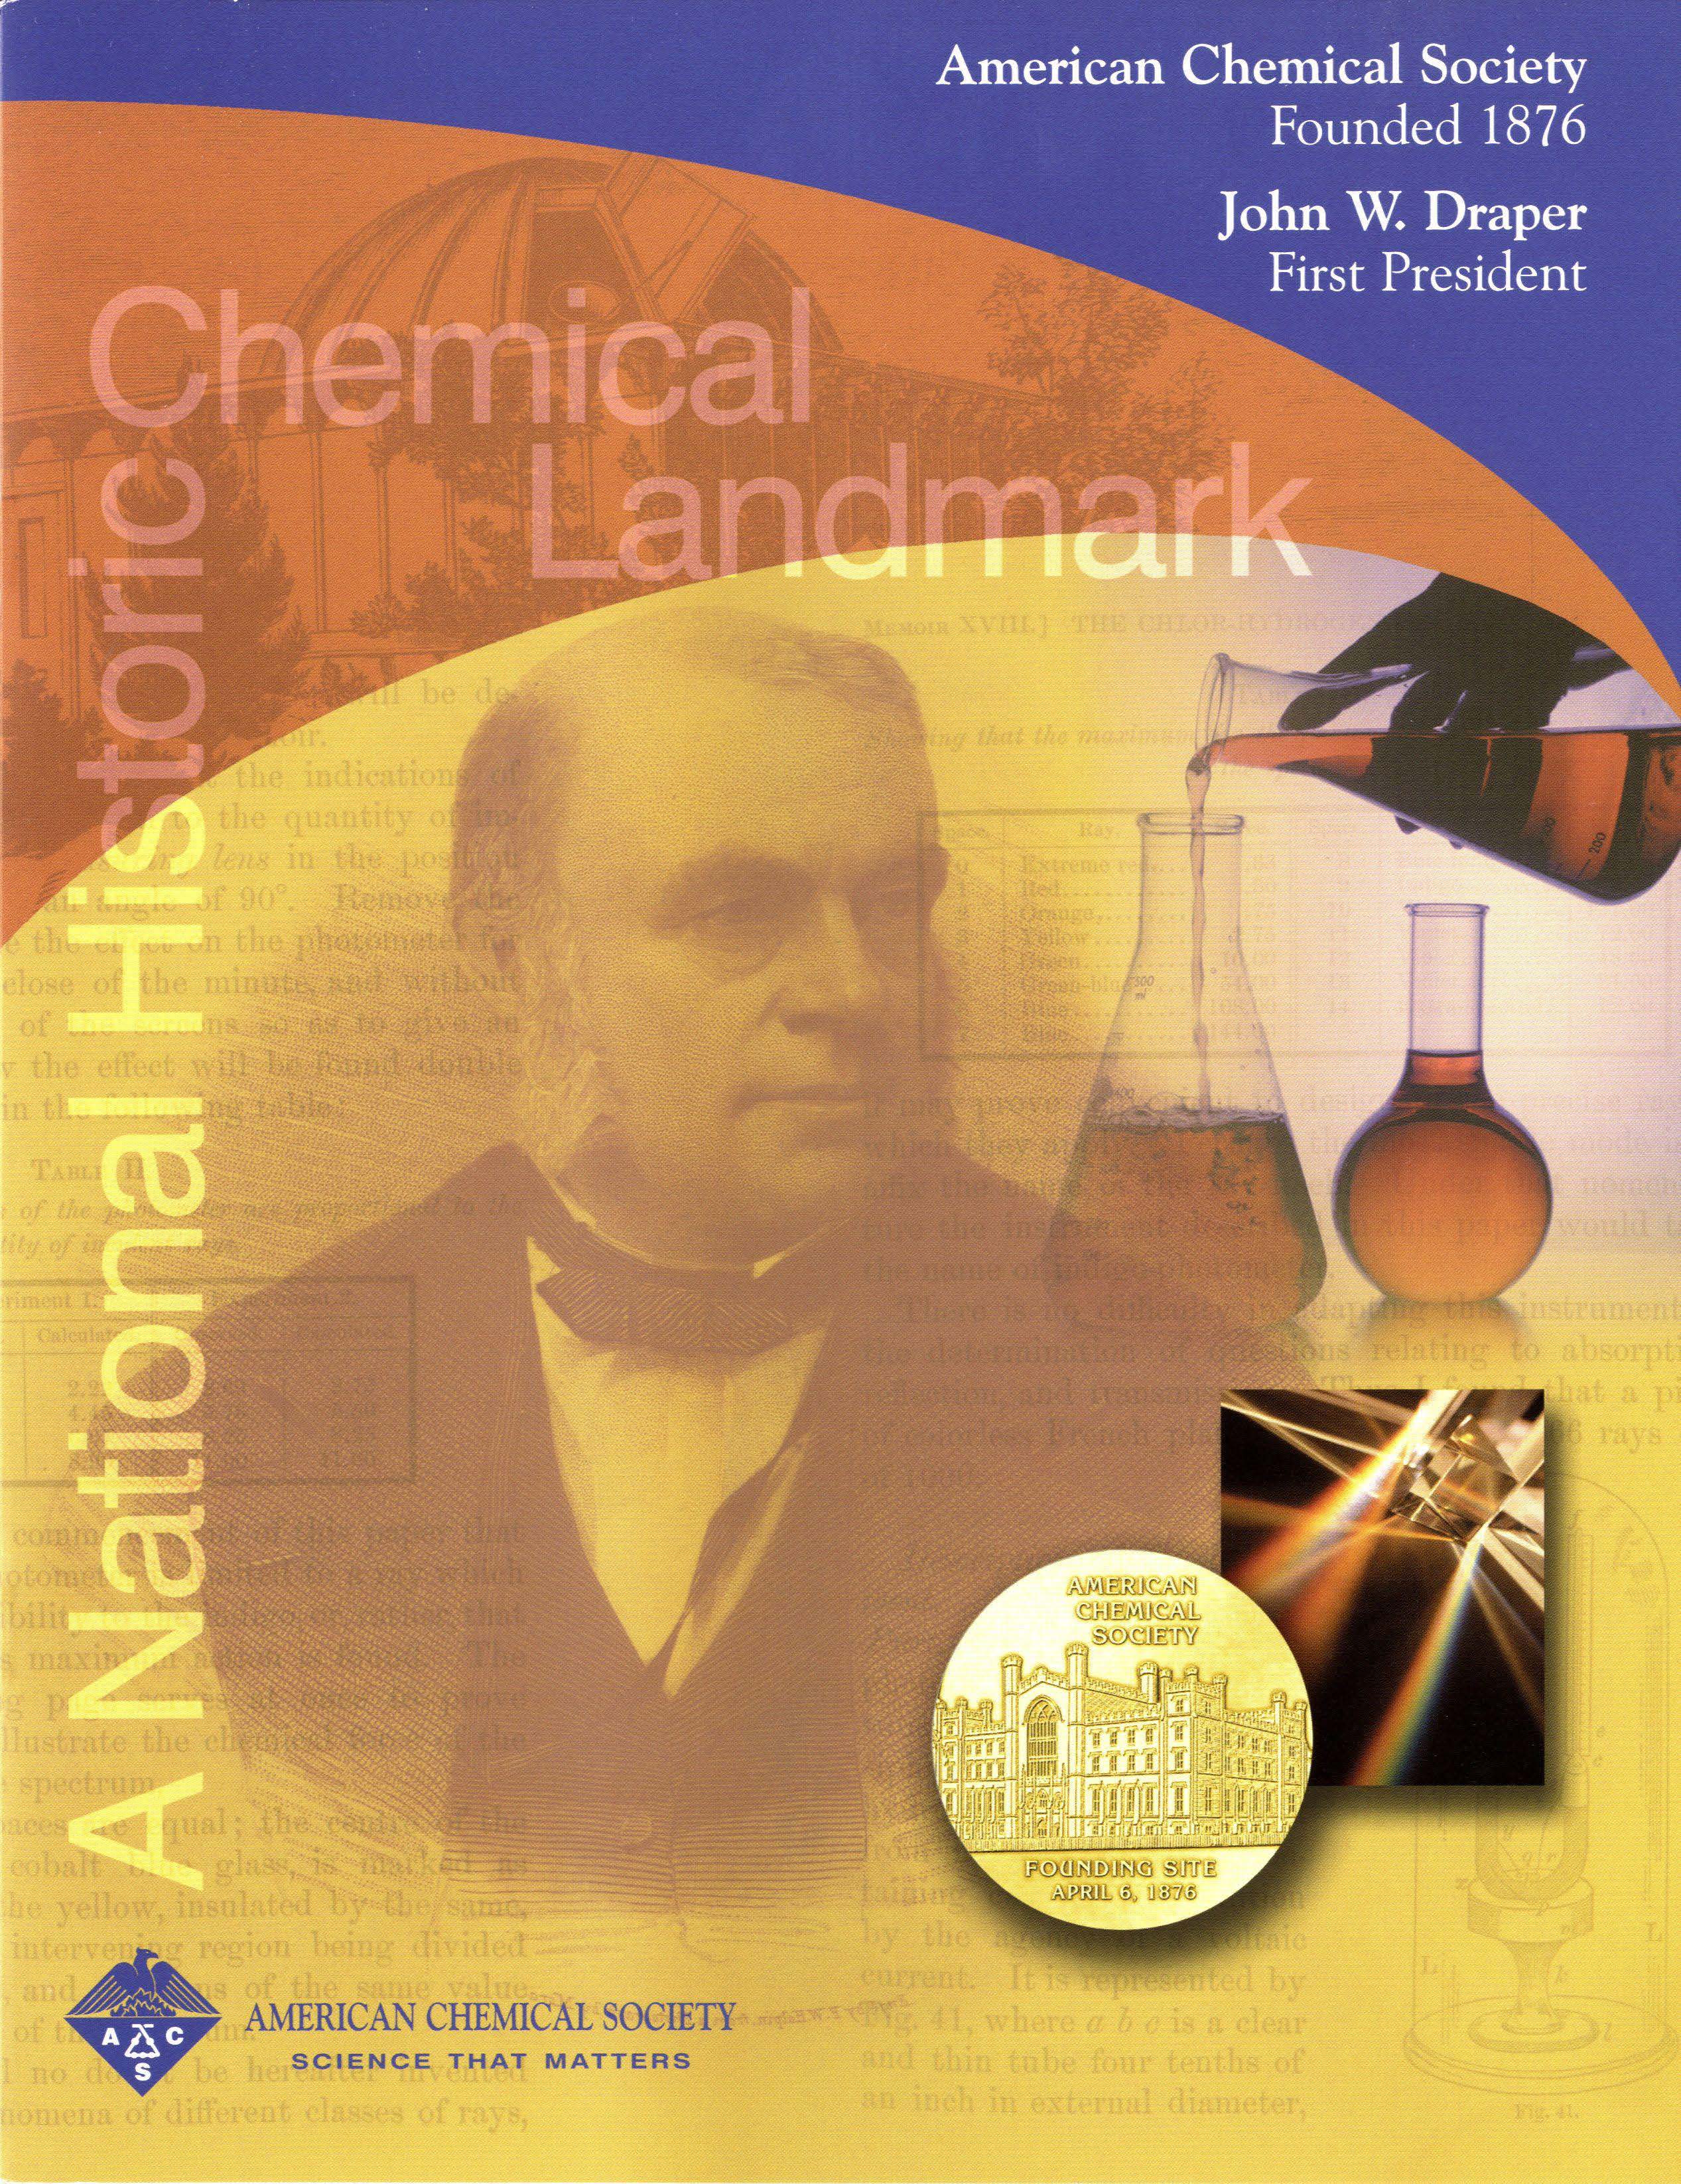 “American Chemical Society Founded 1876, John W. Draper First President” commemorative booklet